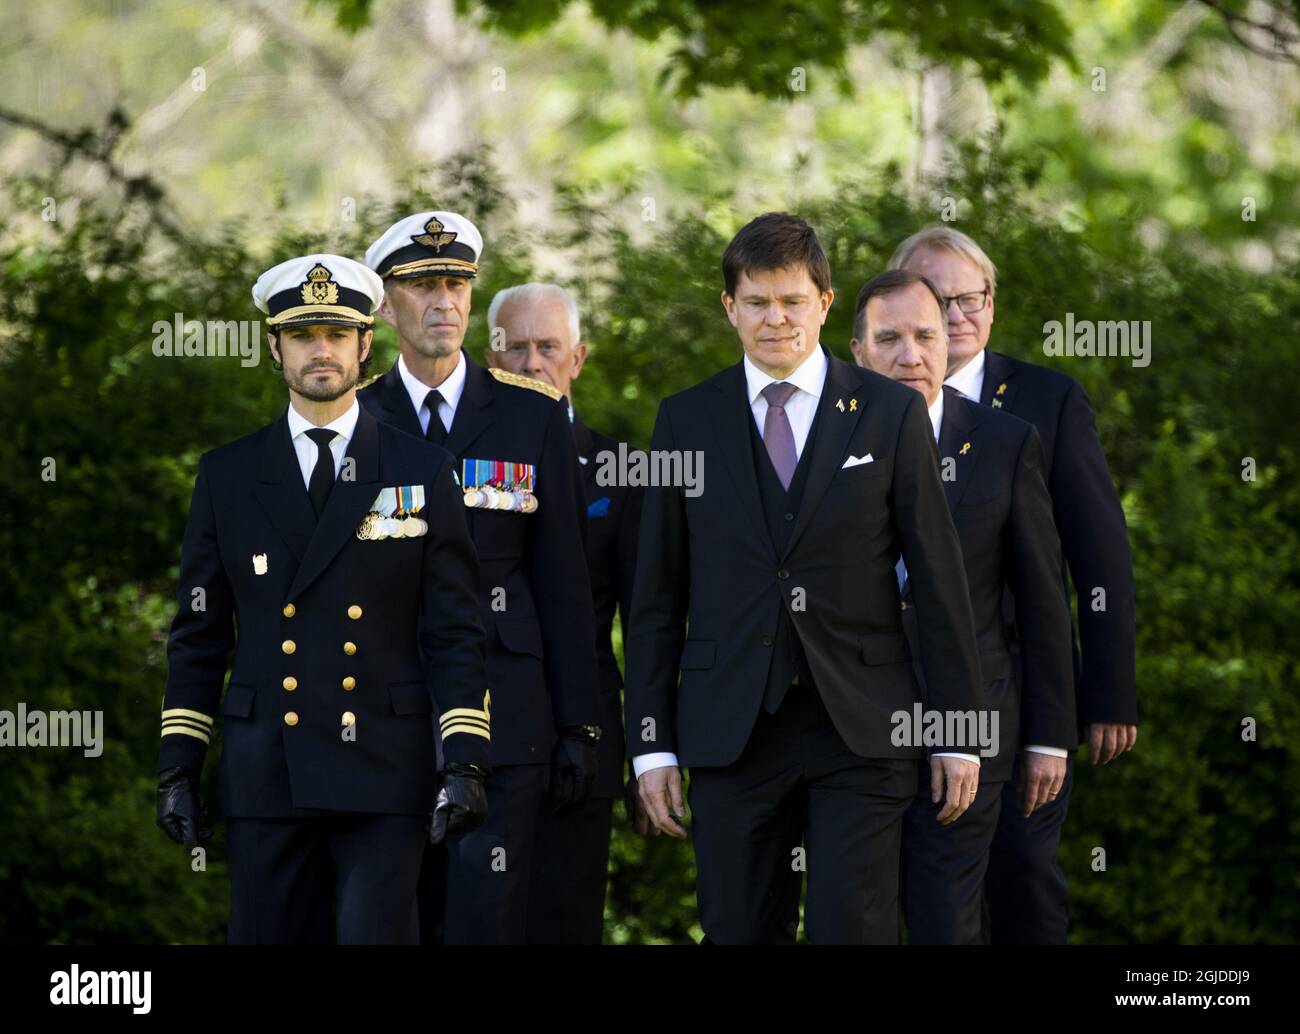 Prince Carl Philip, General Micael Bydén, Sverker Goranson, chairman of the Swedish Veterans Association, Andreas Norlén, Speaker of the Parliament, Prime Minister Stefan Lofven and Peter Hultqvist, Minister for Defence, during Sweden's Veterans Day at the Kungsangen regiment in Stockholm, Sweden, May 29, 2020. Photo: Pontus Lundahl / TT / code 10050  Stock Photo